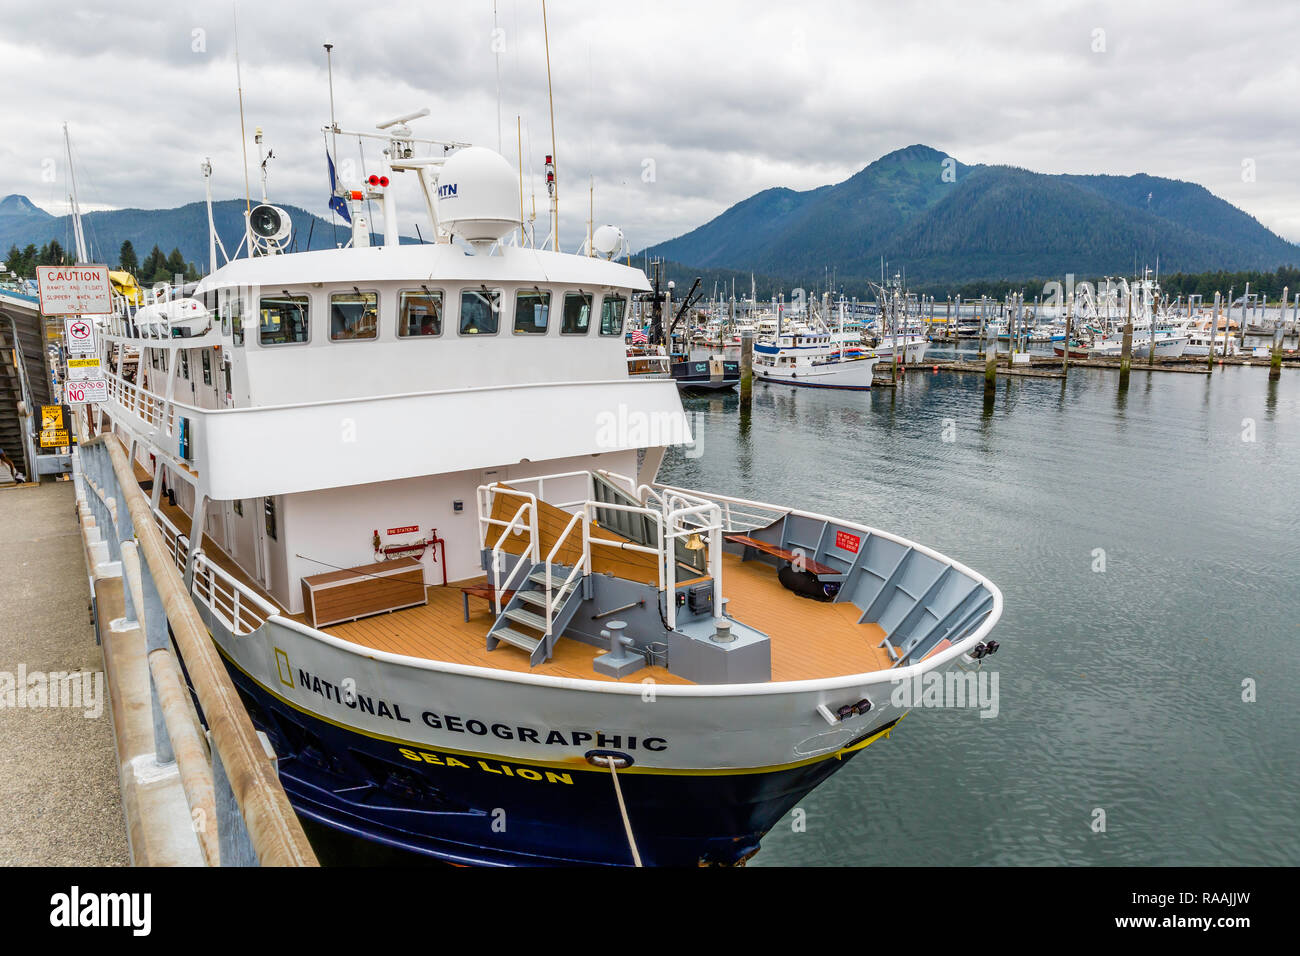 The National Geographic Sea Lion at dock in Petersburg, southeast Alaska, USA. Stock Photo